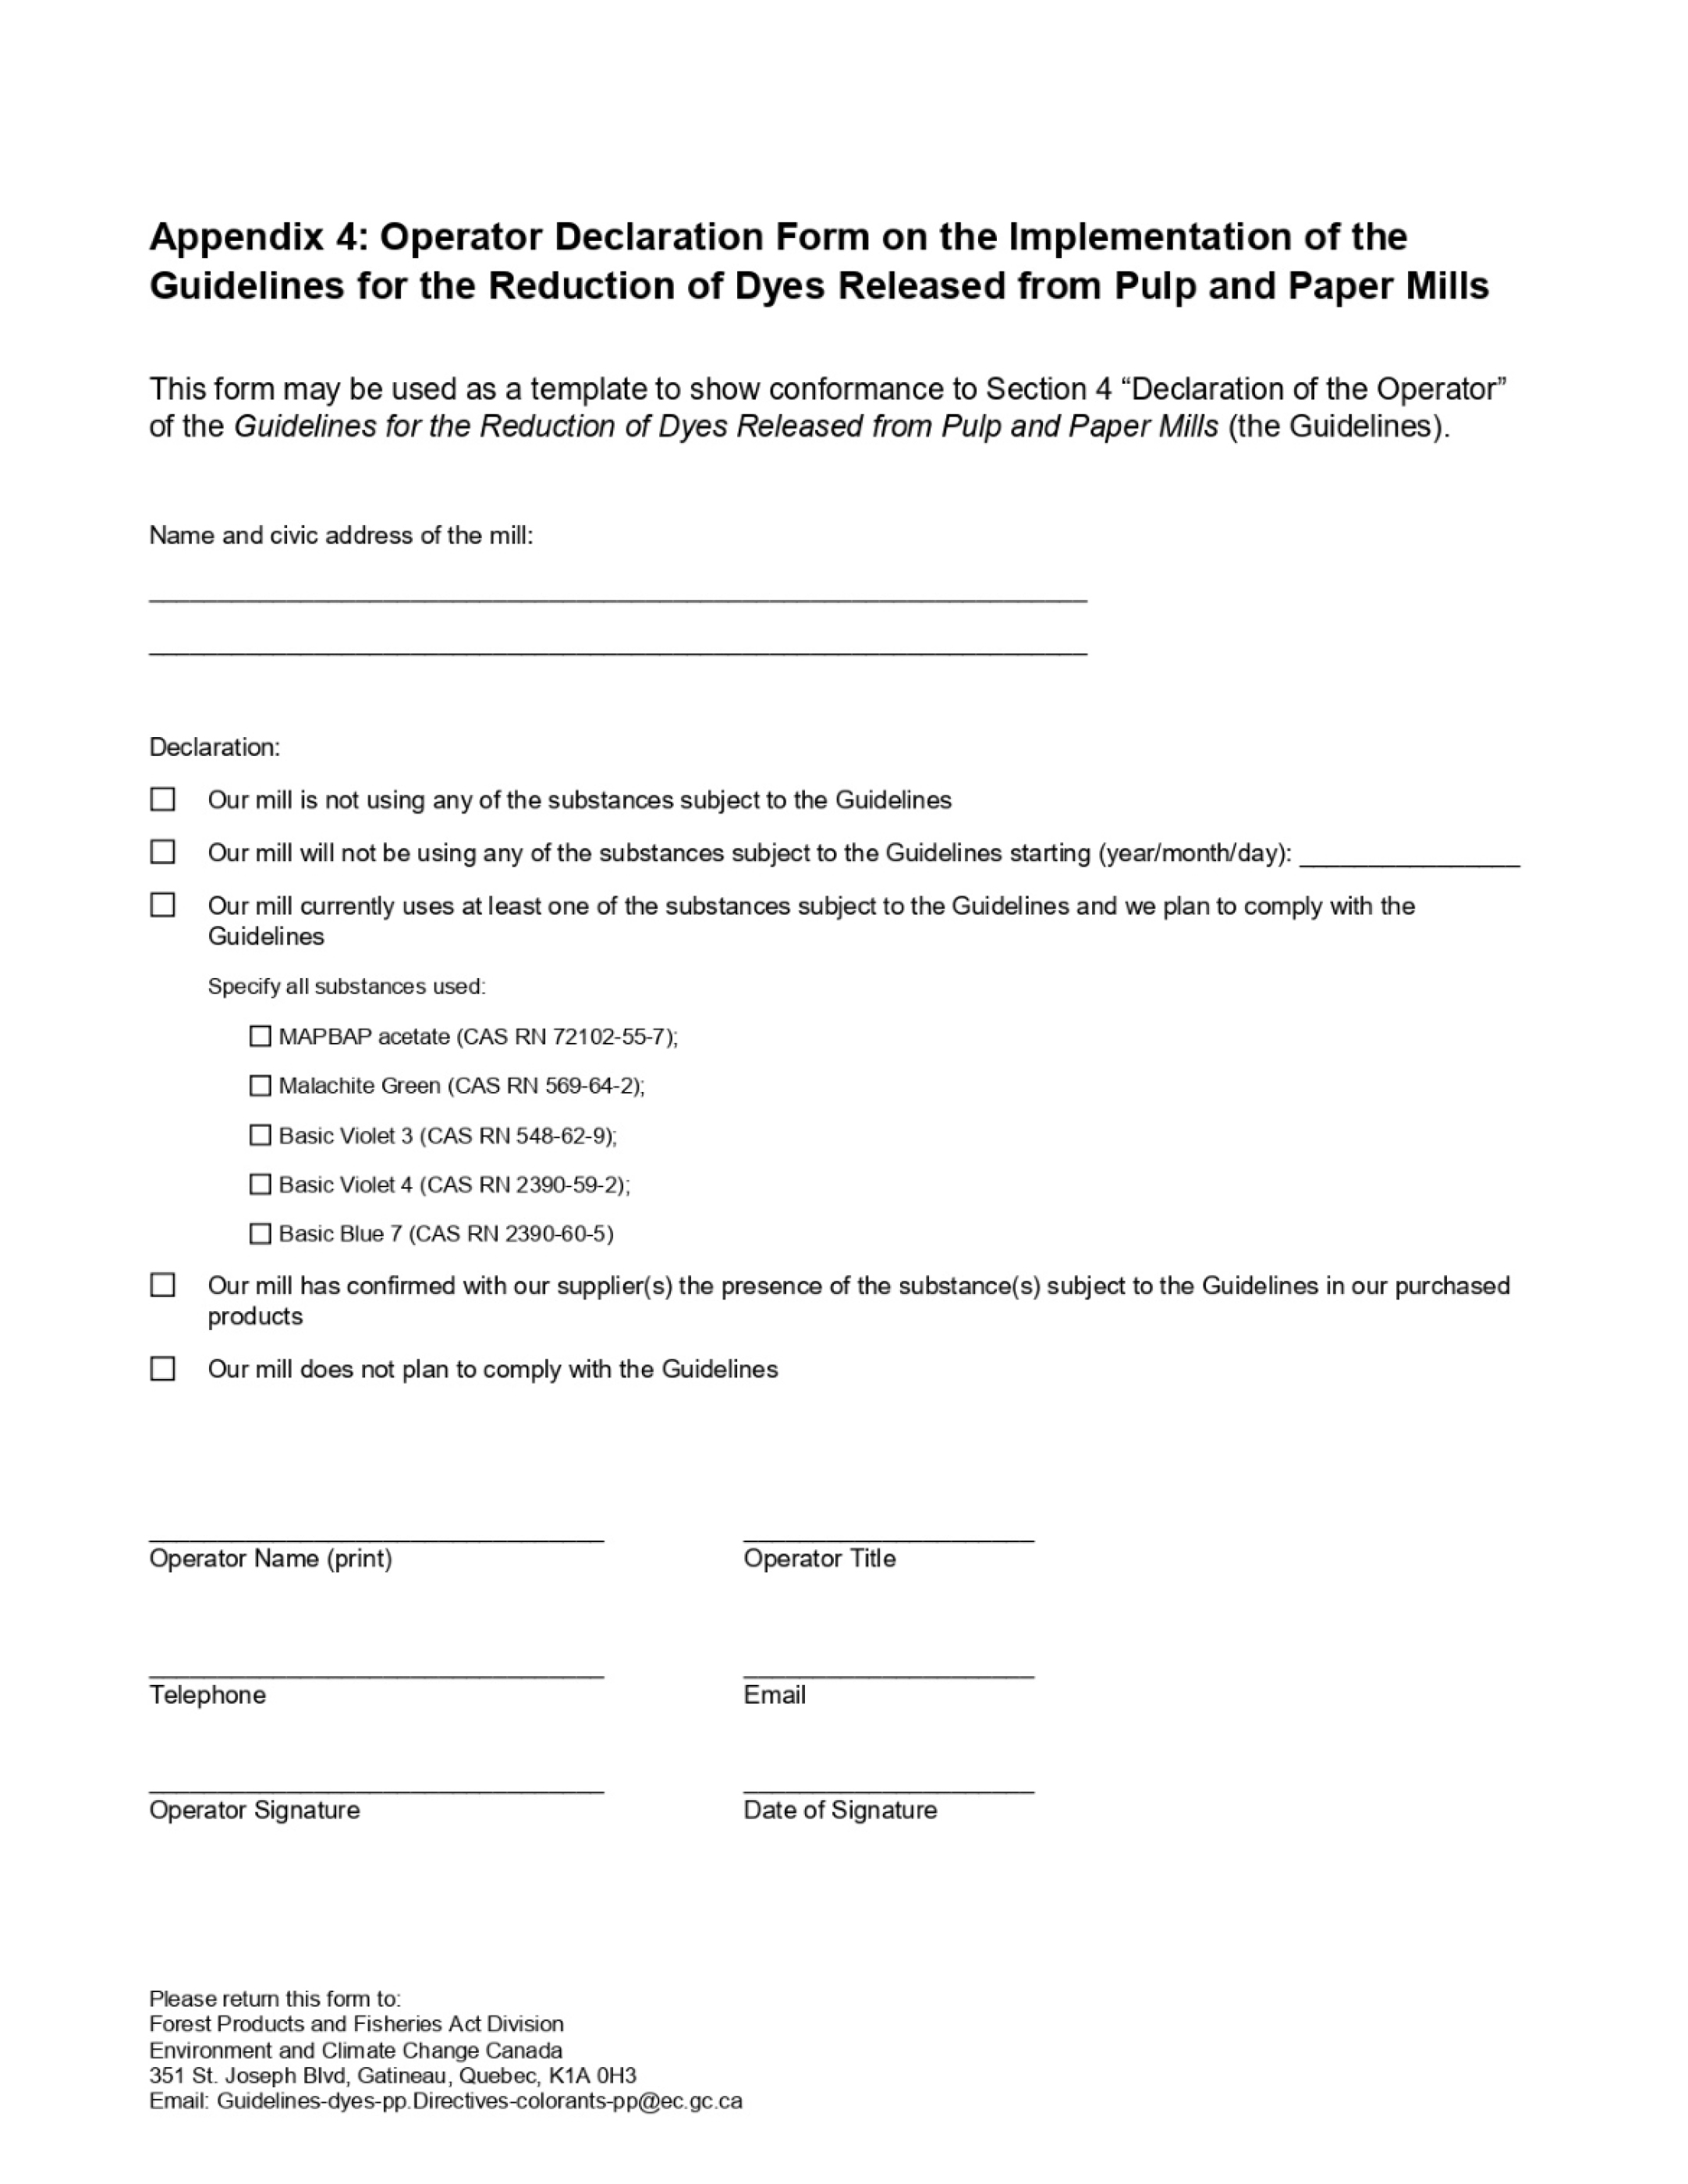 Appendix 4 Example of the Operator Declaration Form – Text version below the image